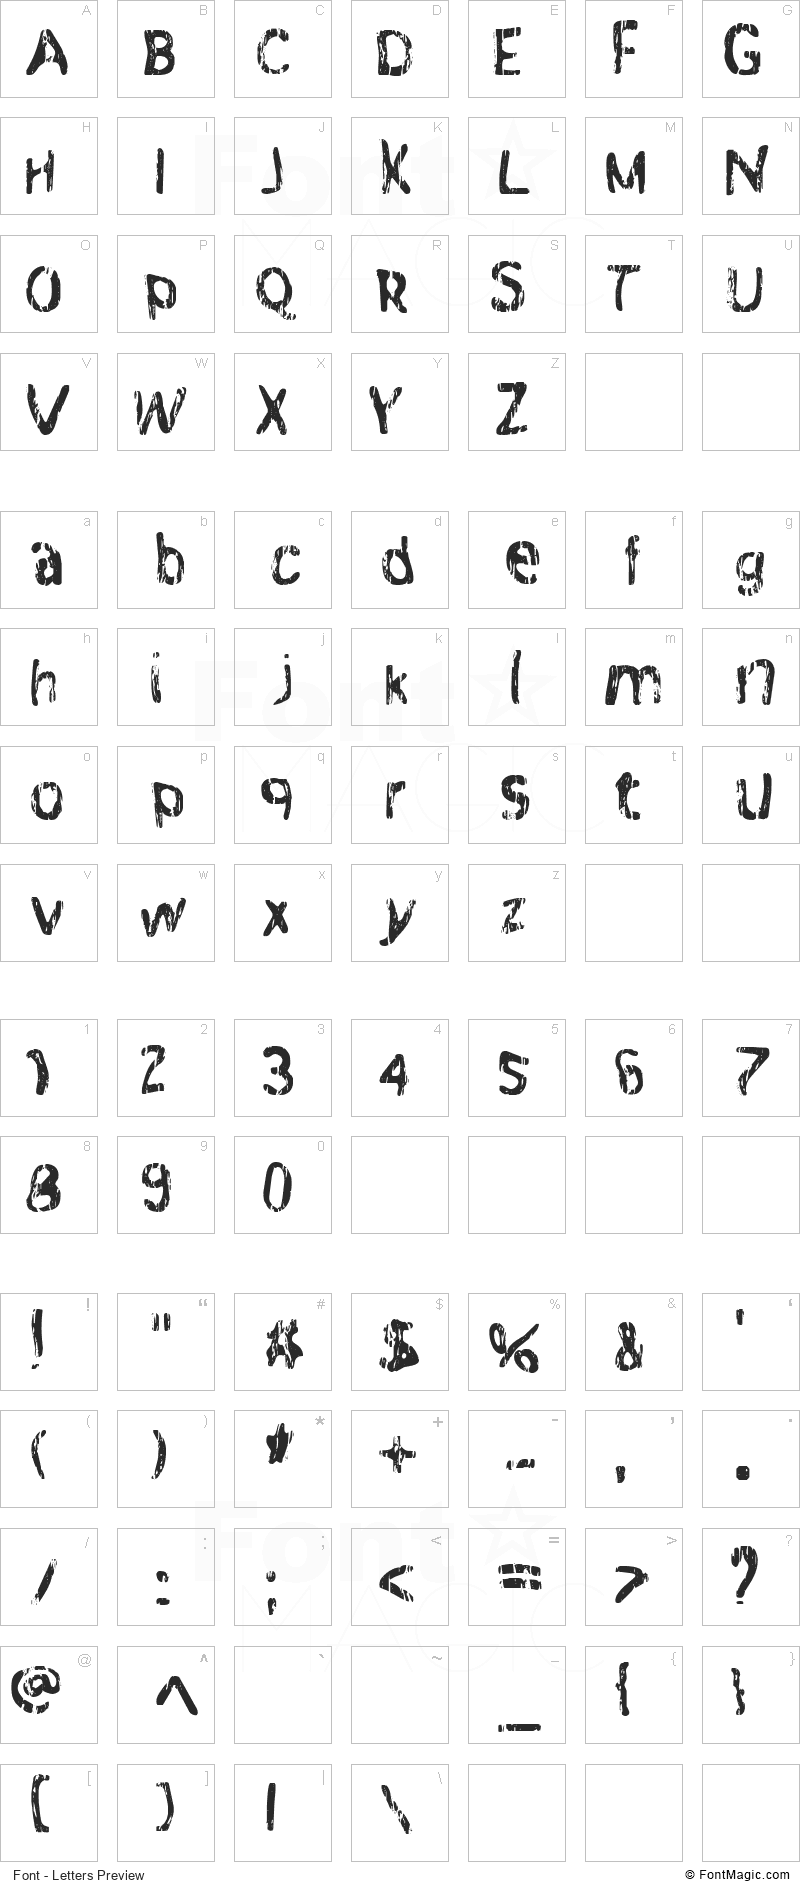 Warpspeed 9 Font - All Latters Preview Chart